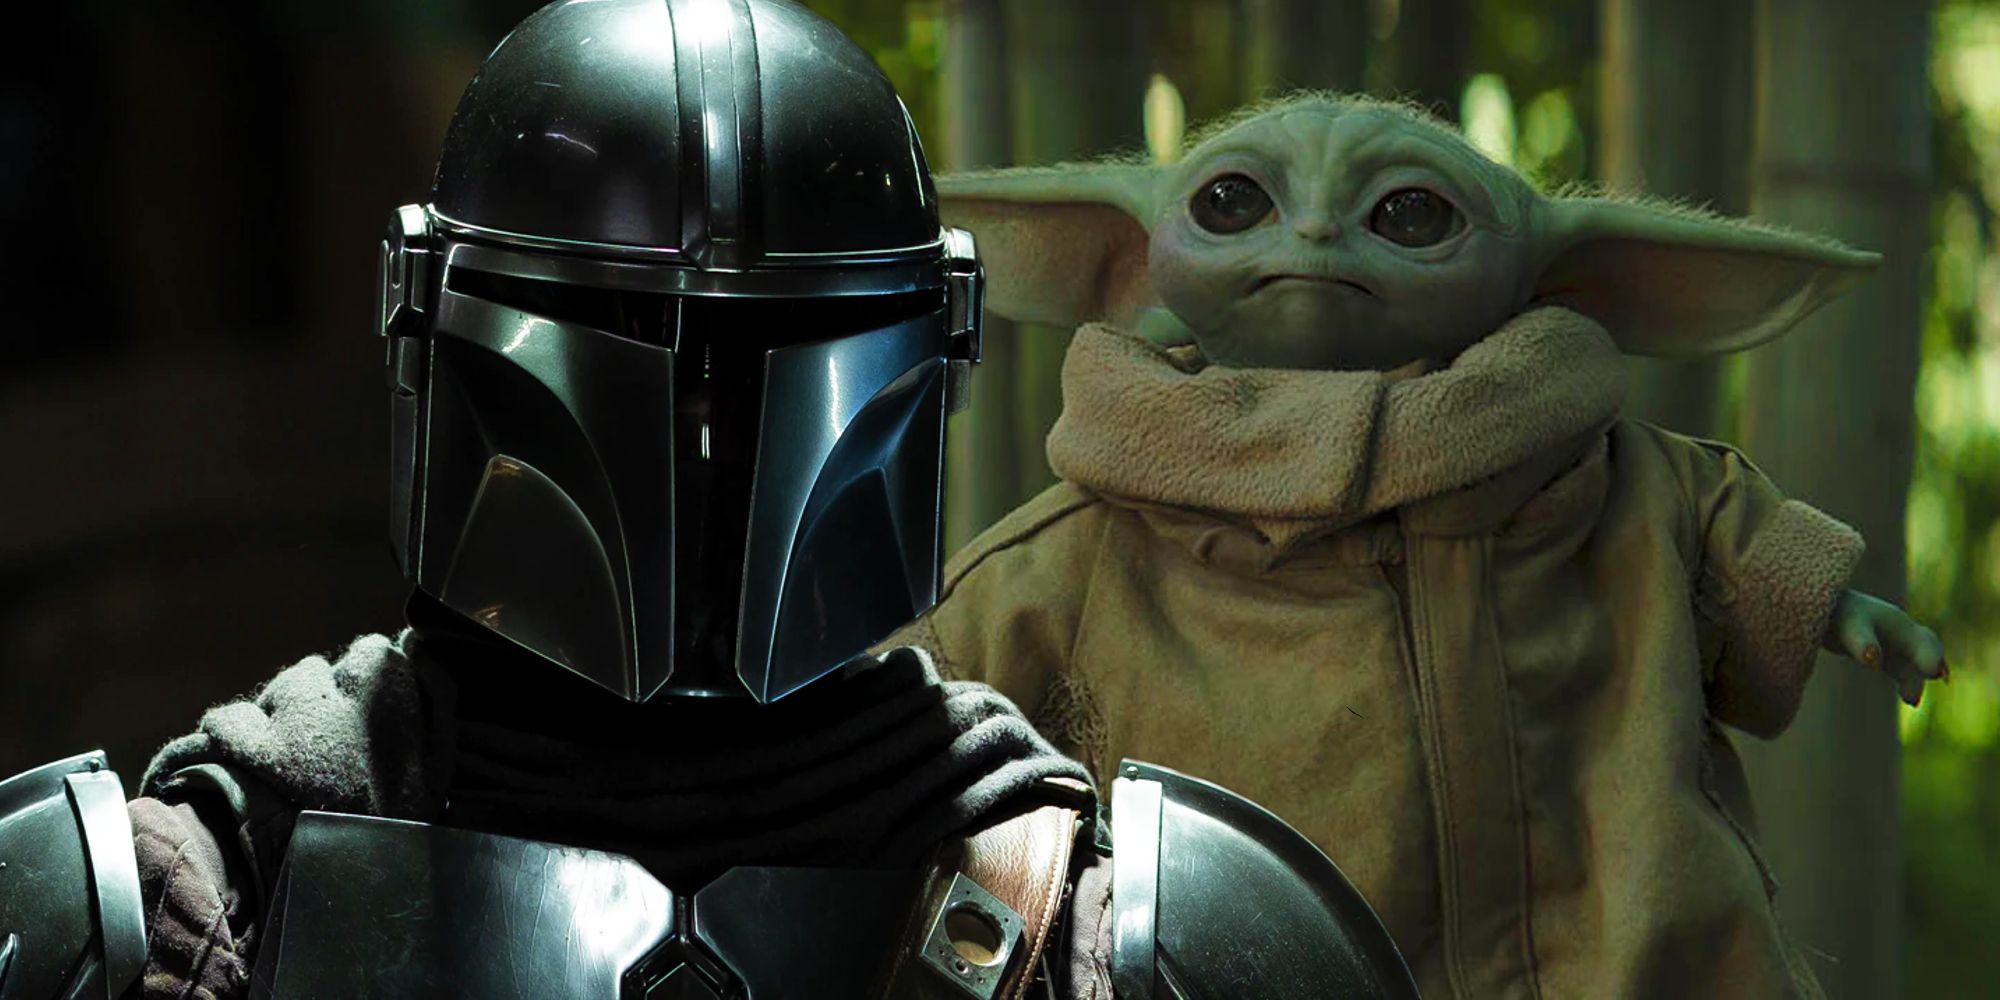 The Mandalorian and Grogu during Jedi training from the Book of Boba Fett